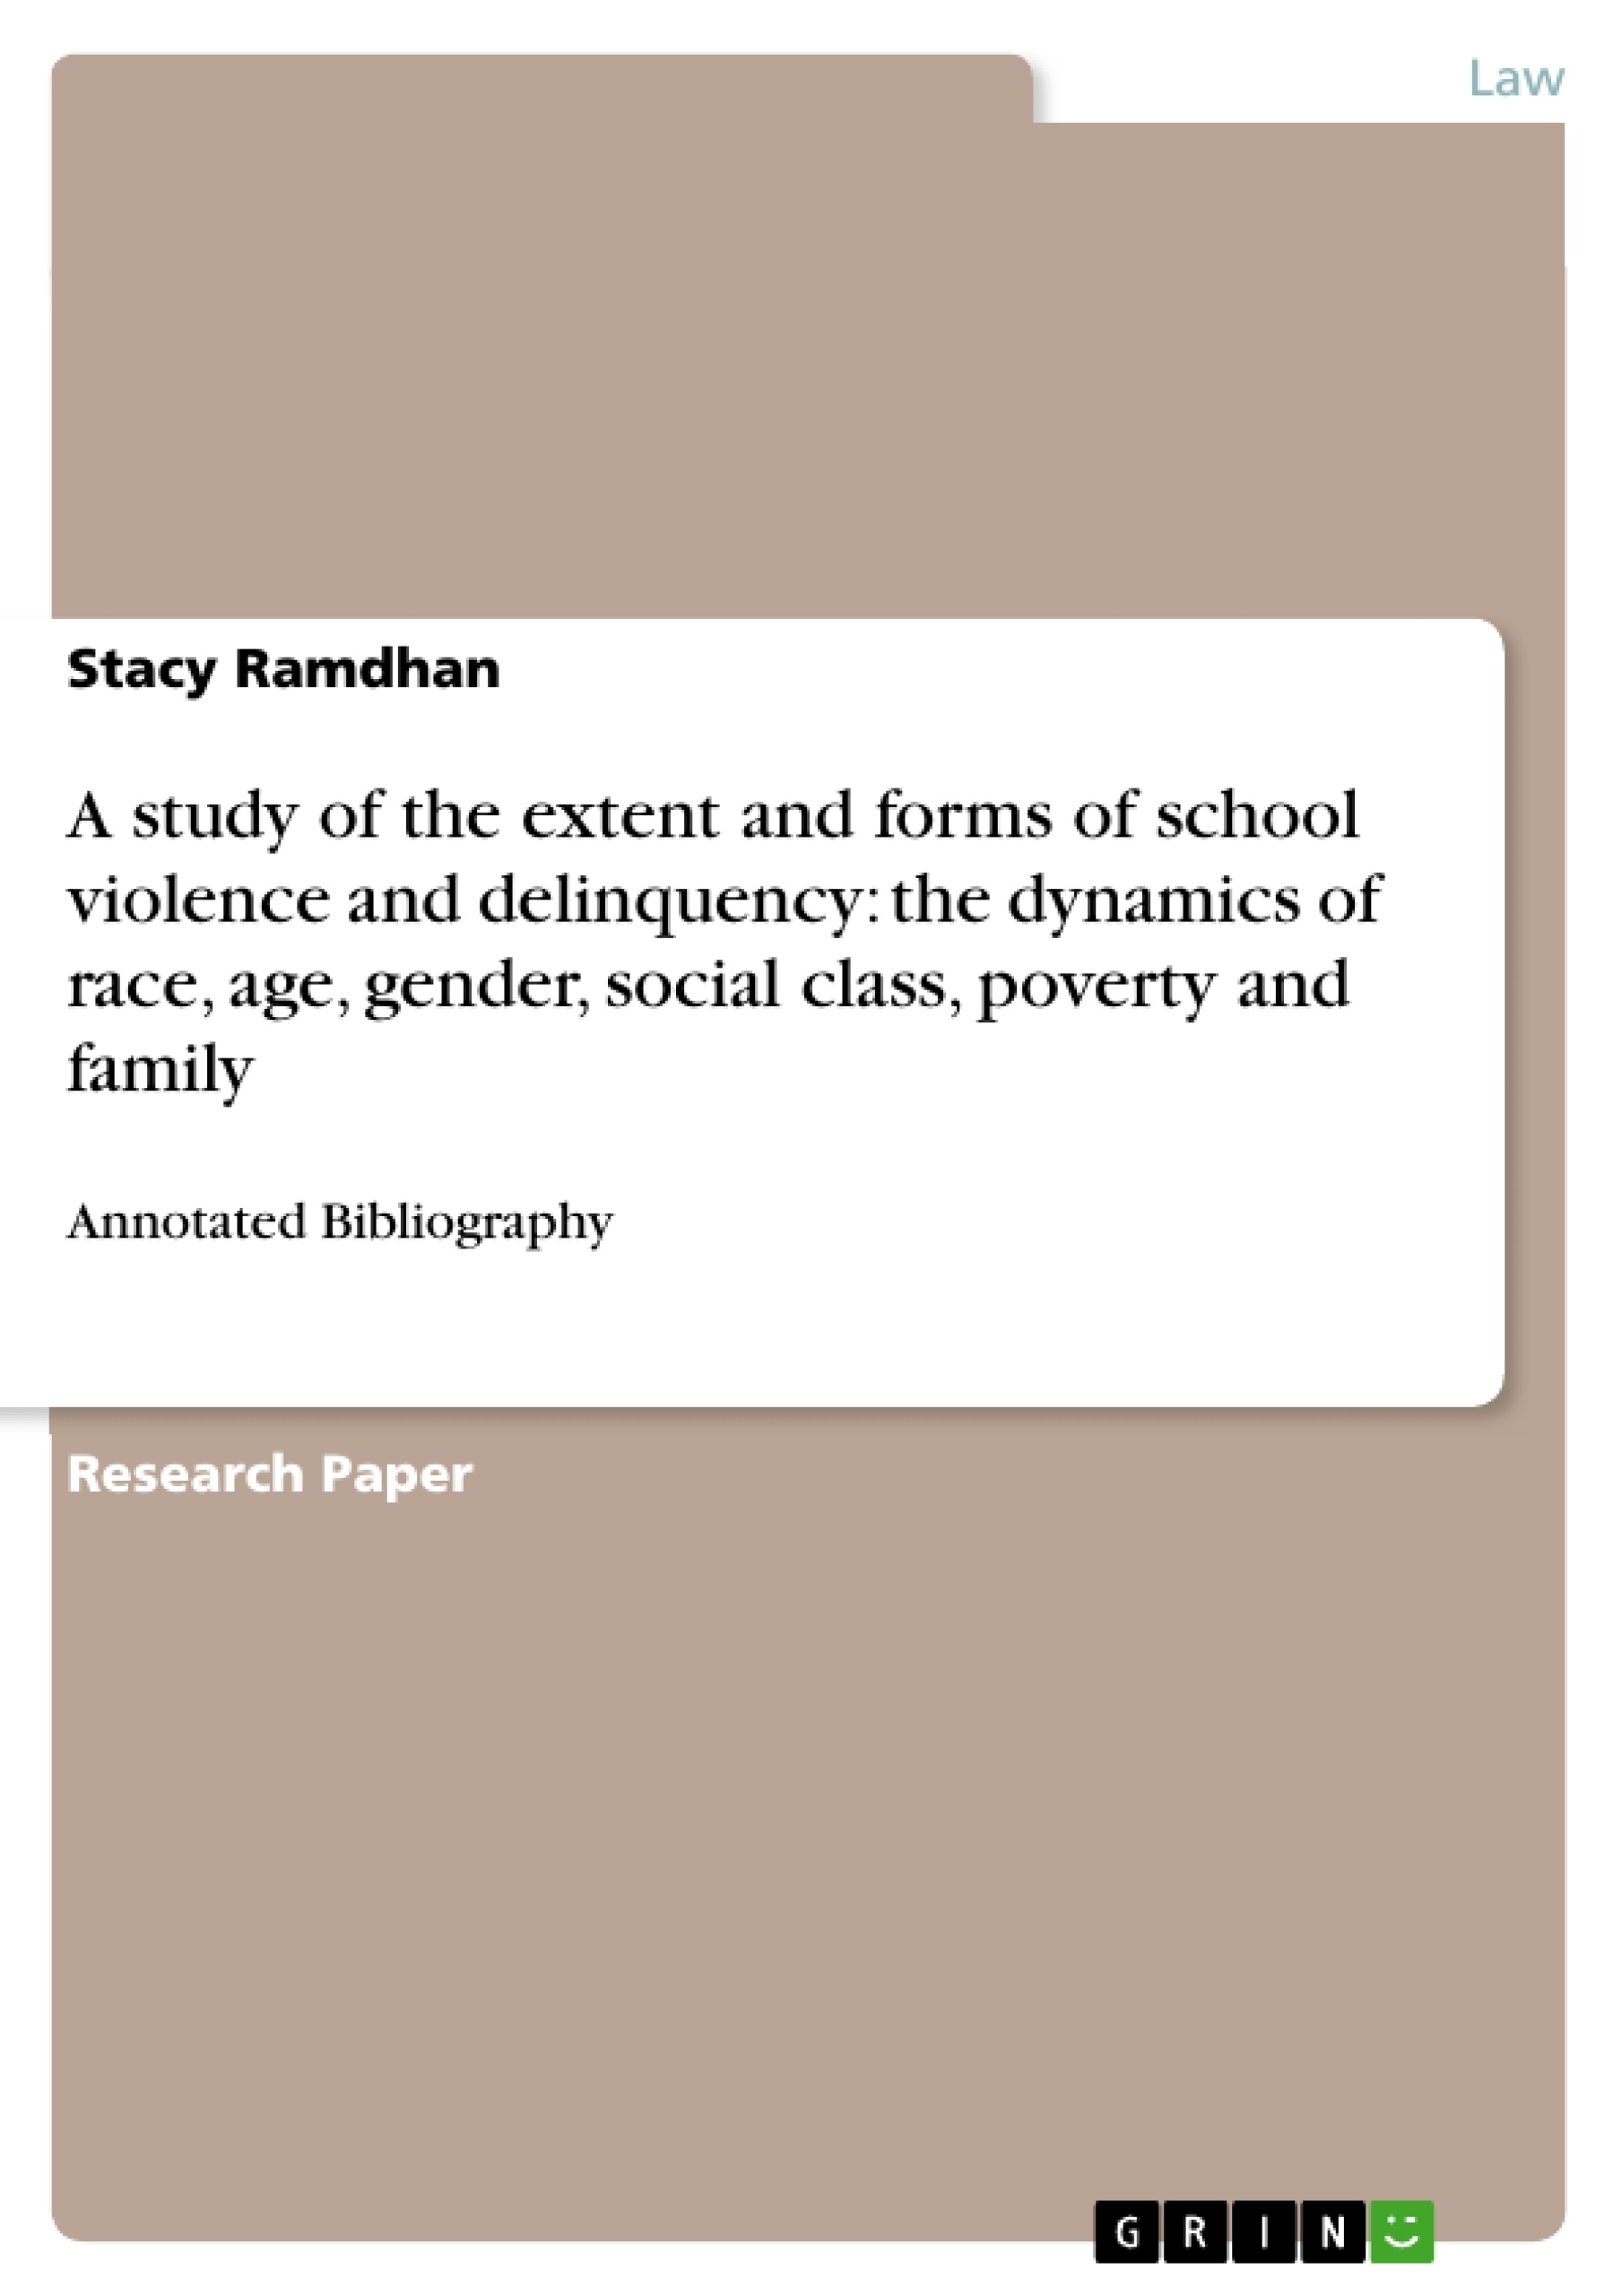 Titre: A study of the extent and forms of school violence and delinquency: the dynamics of race, age, gender, social class, poverty and family